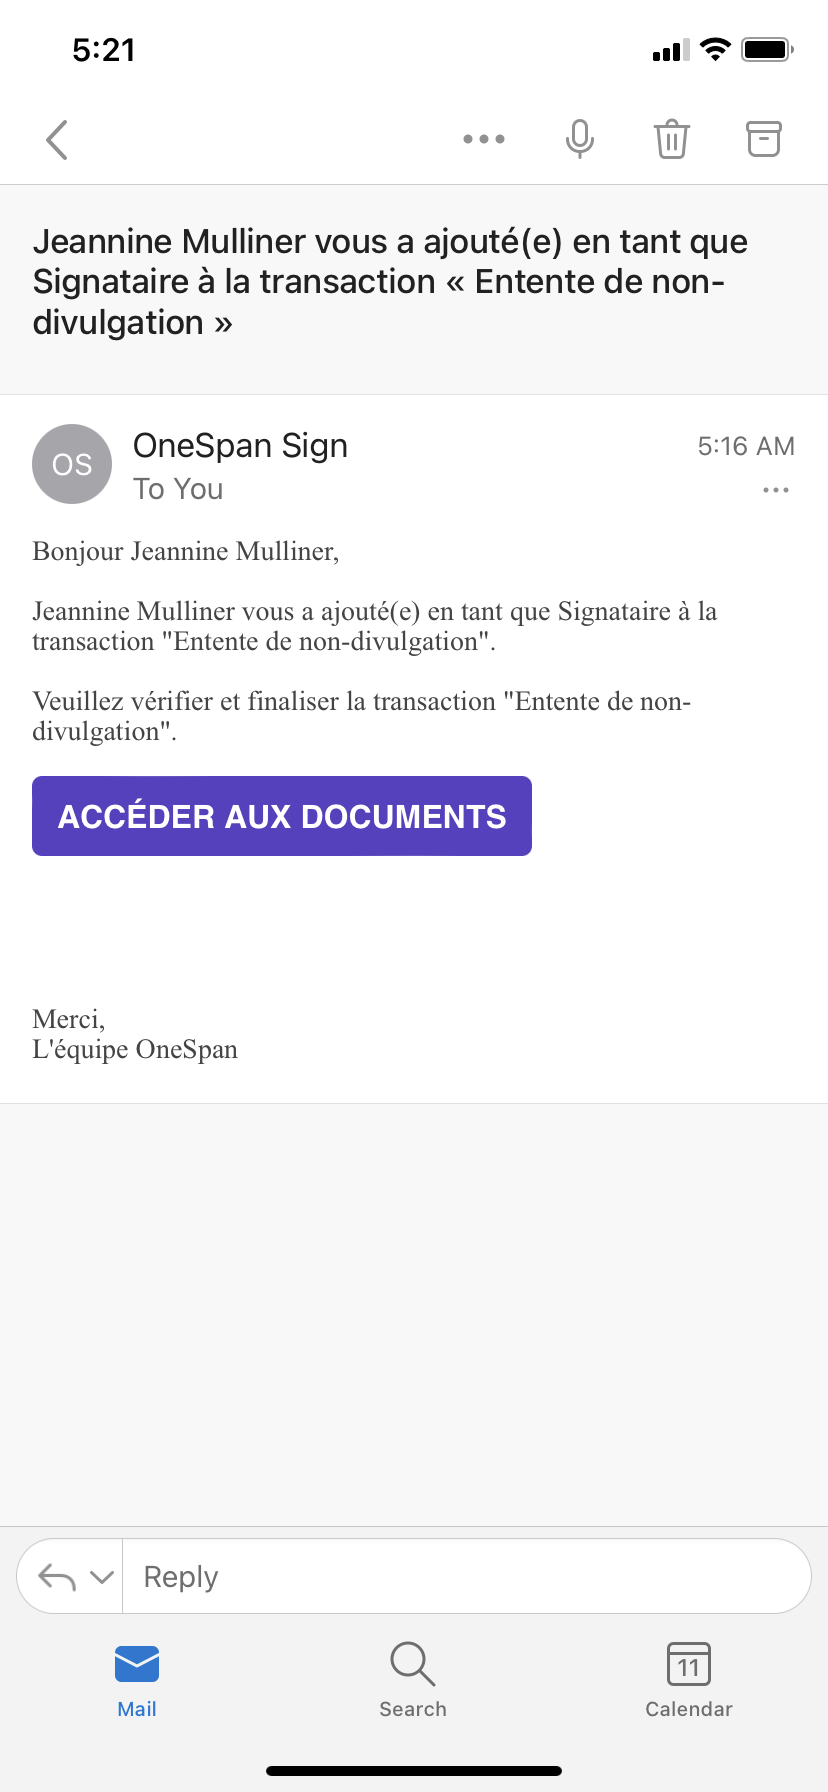 Acceder aux documents